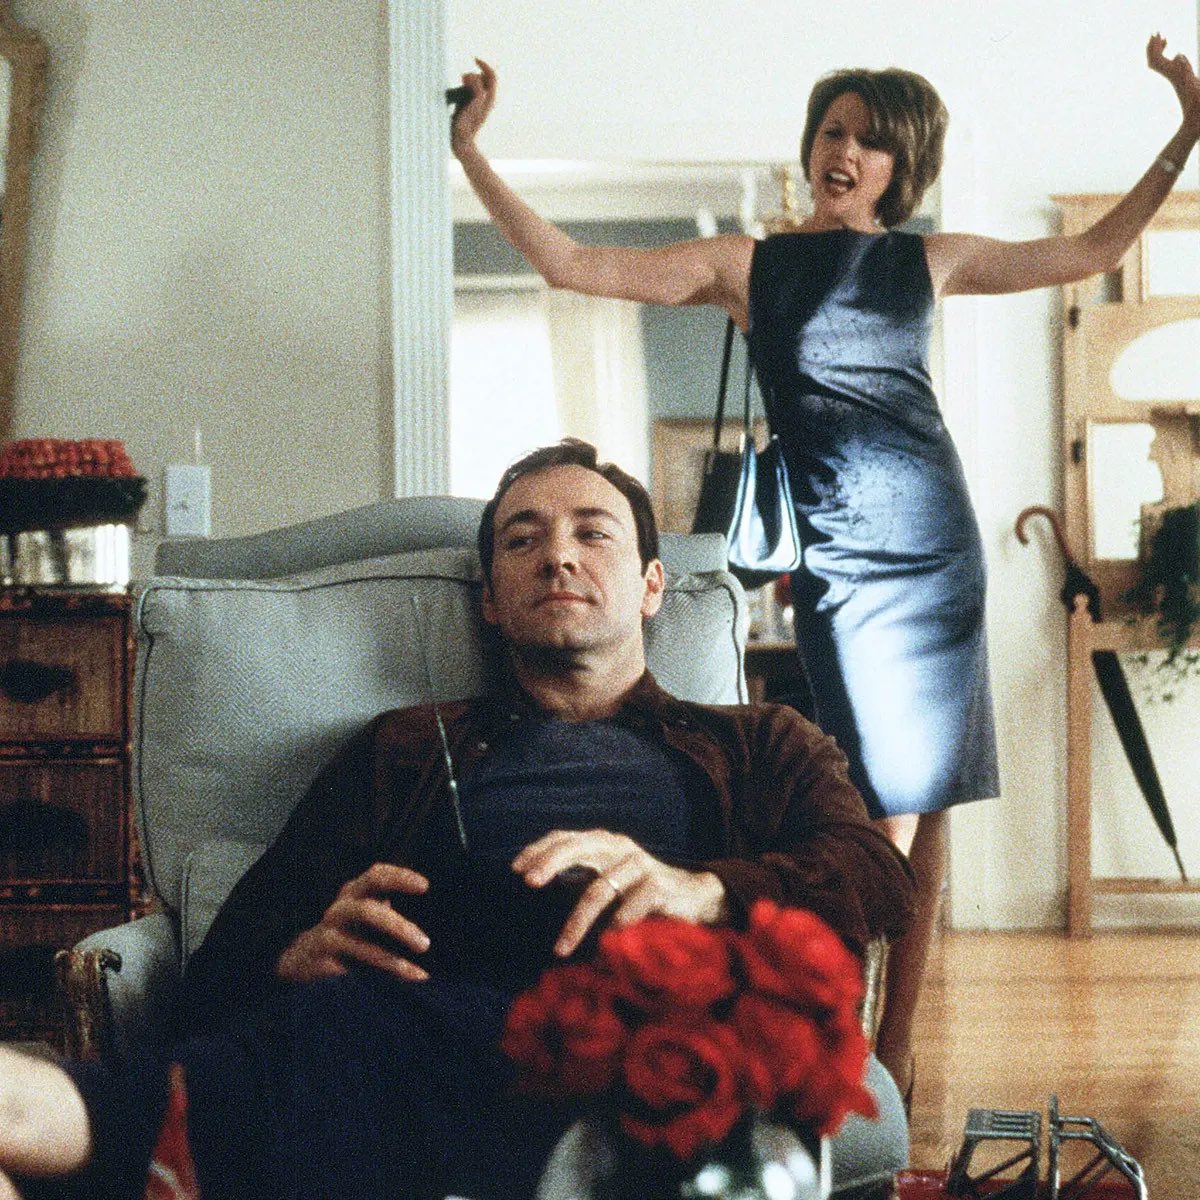 #AnnetteBening #KevinSpacey #AmericanBeauty (1999)